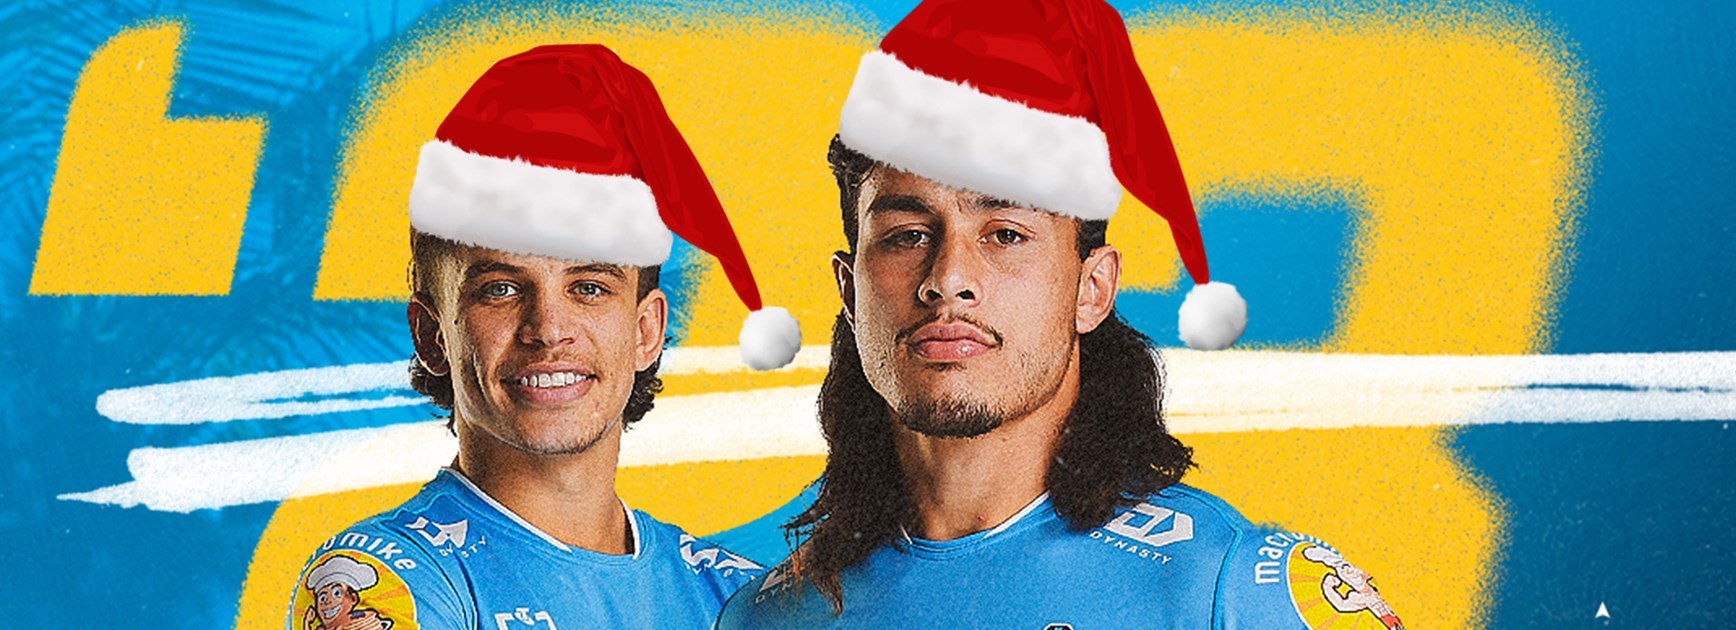 Your Titans Christmas all wrapped up